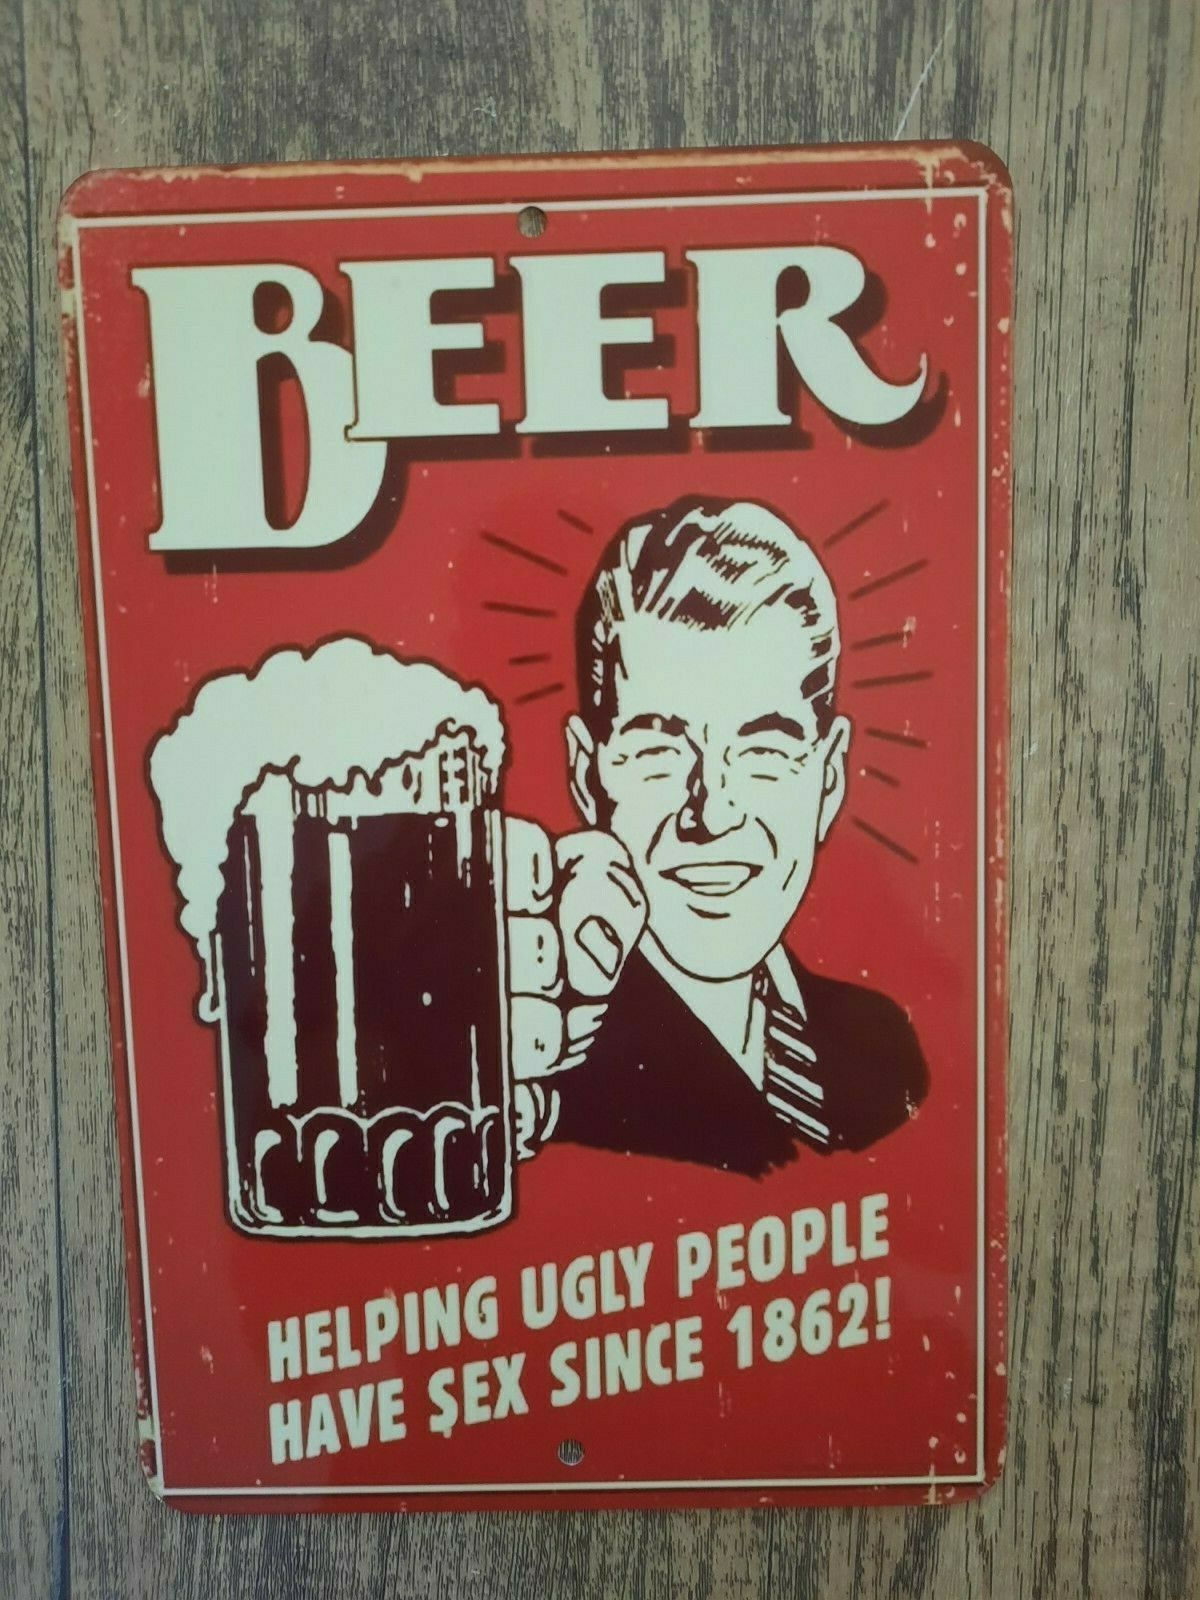 BEER Helping Ugly People Have Sex Since 19862 Metal Wall 8x12 Bar Sign